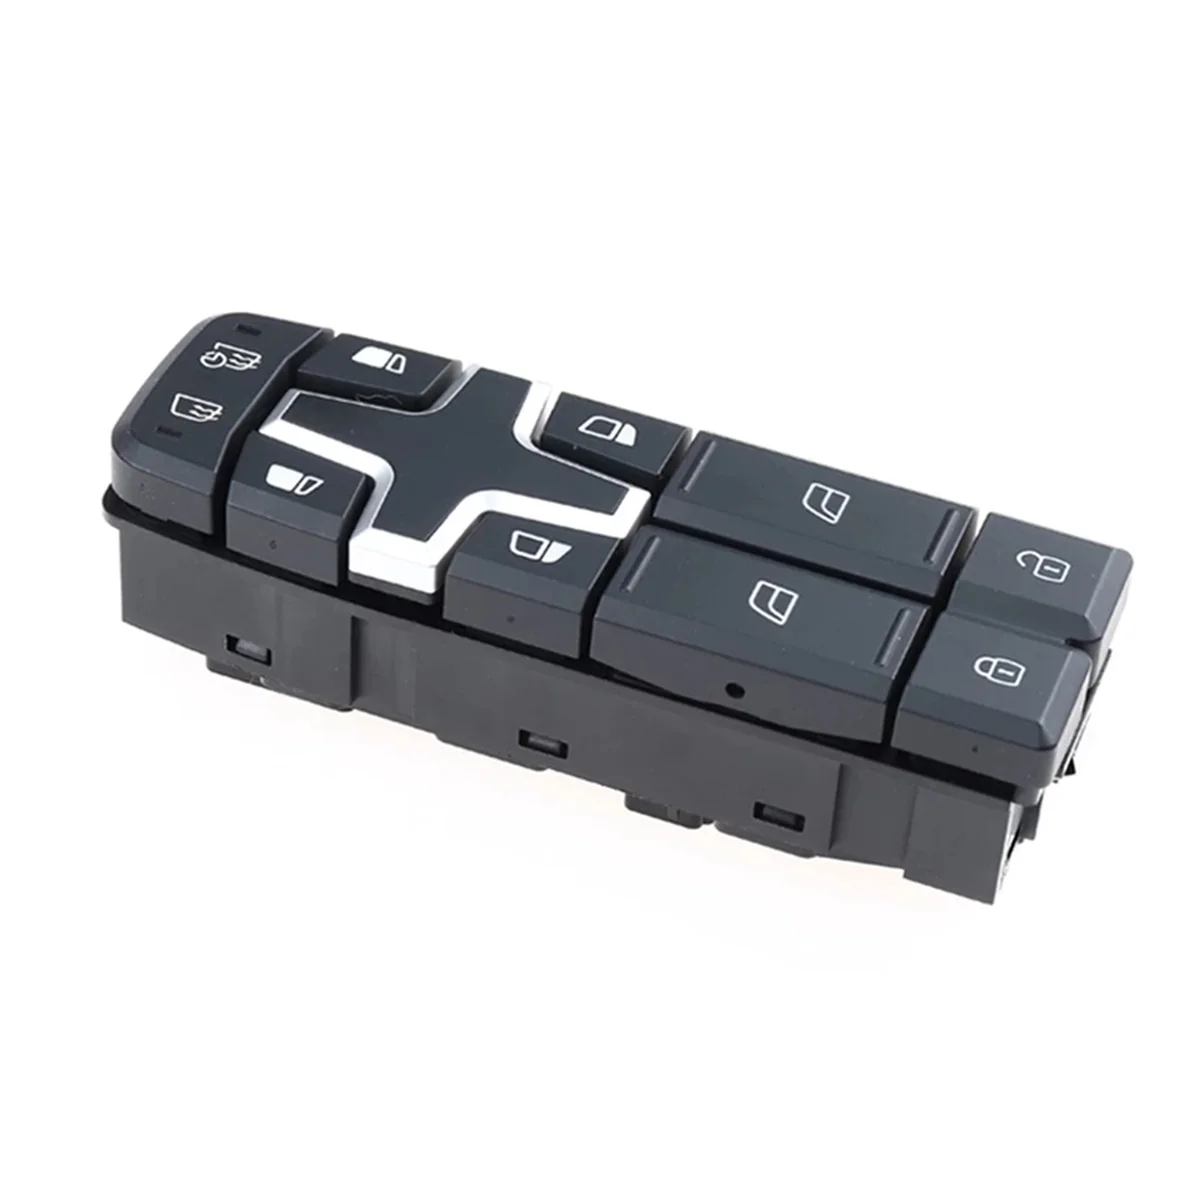 

22154286 Front Left Power Window Switch Gl Lifter Switch Automotive for Volvo Trucks FH FM Series